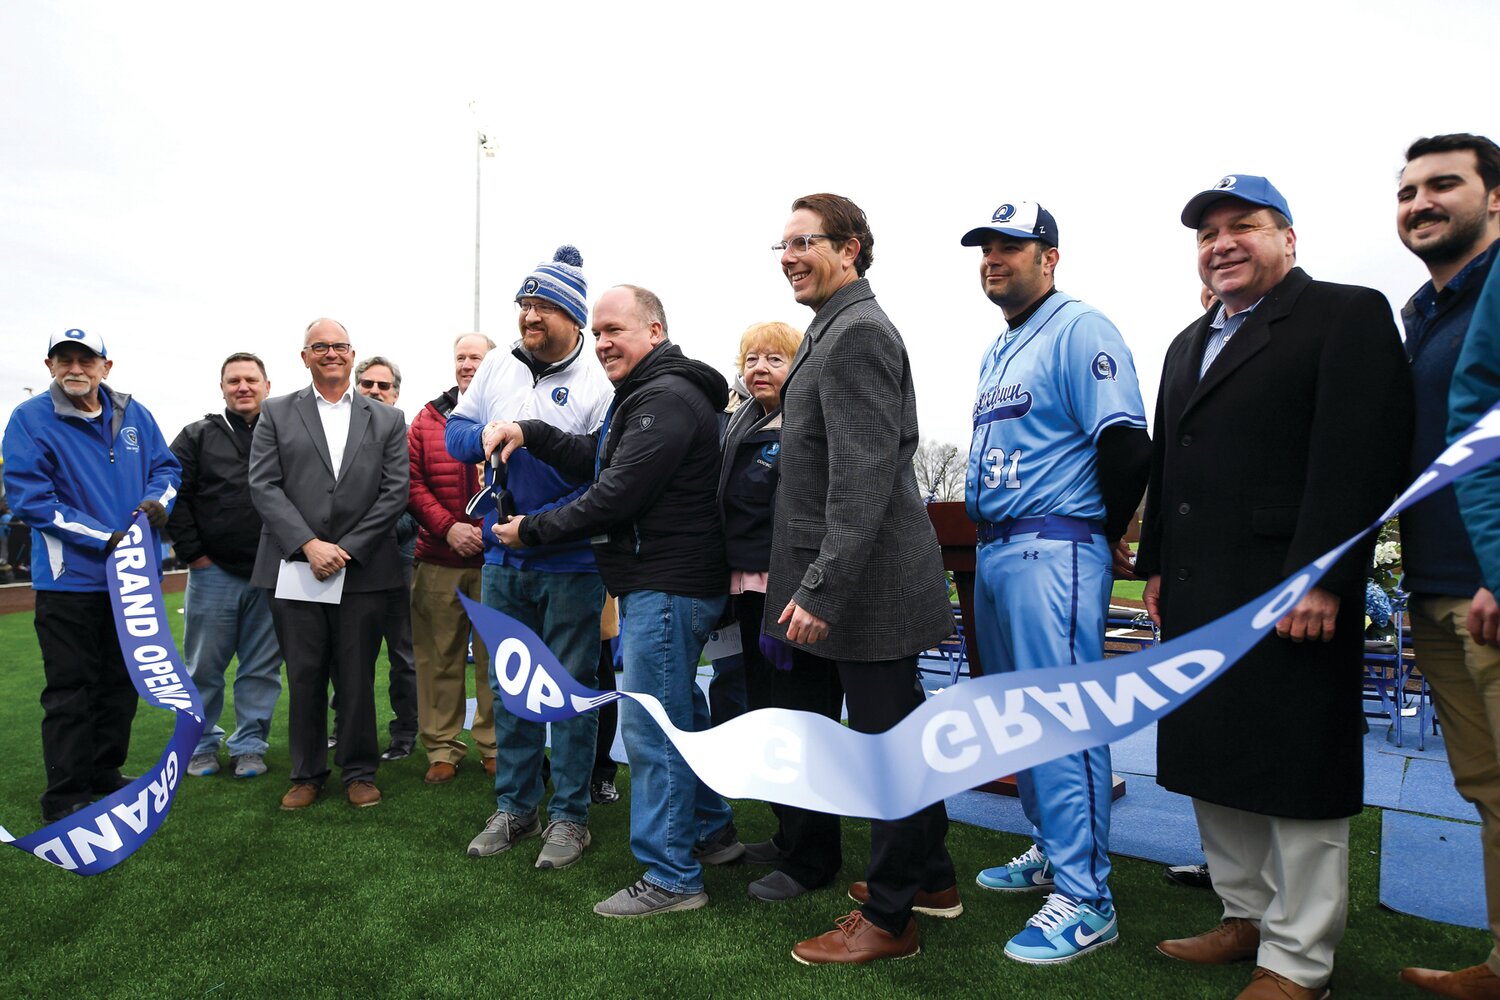 Members of the Quakertown Community School District cut the ribbon during the grand opening ceremony for the district’s new multi-purpose field. In the center are Todd Hippauf, Quakertown Community School District Board president (hat); board member Glenn Iosue and Dr Matt Friedman, superintendent.